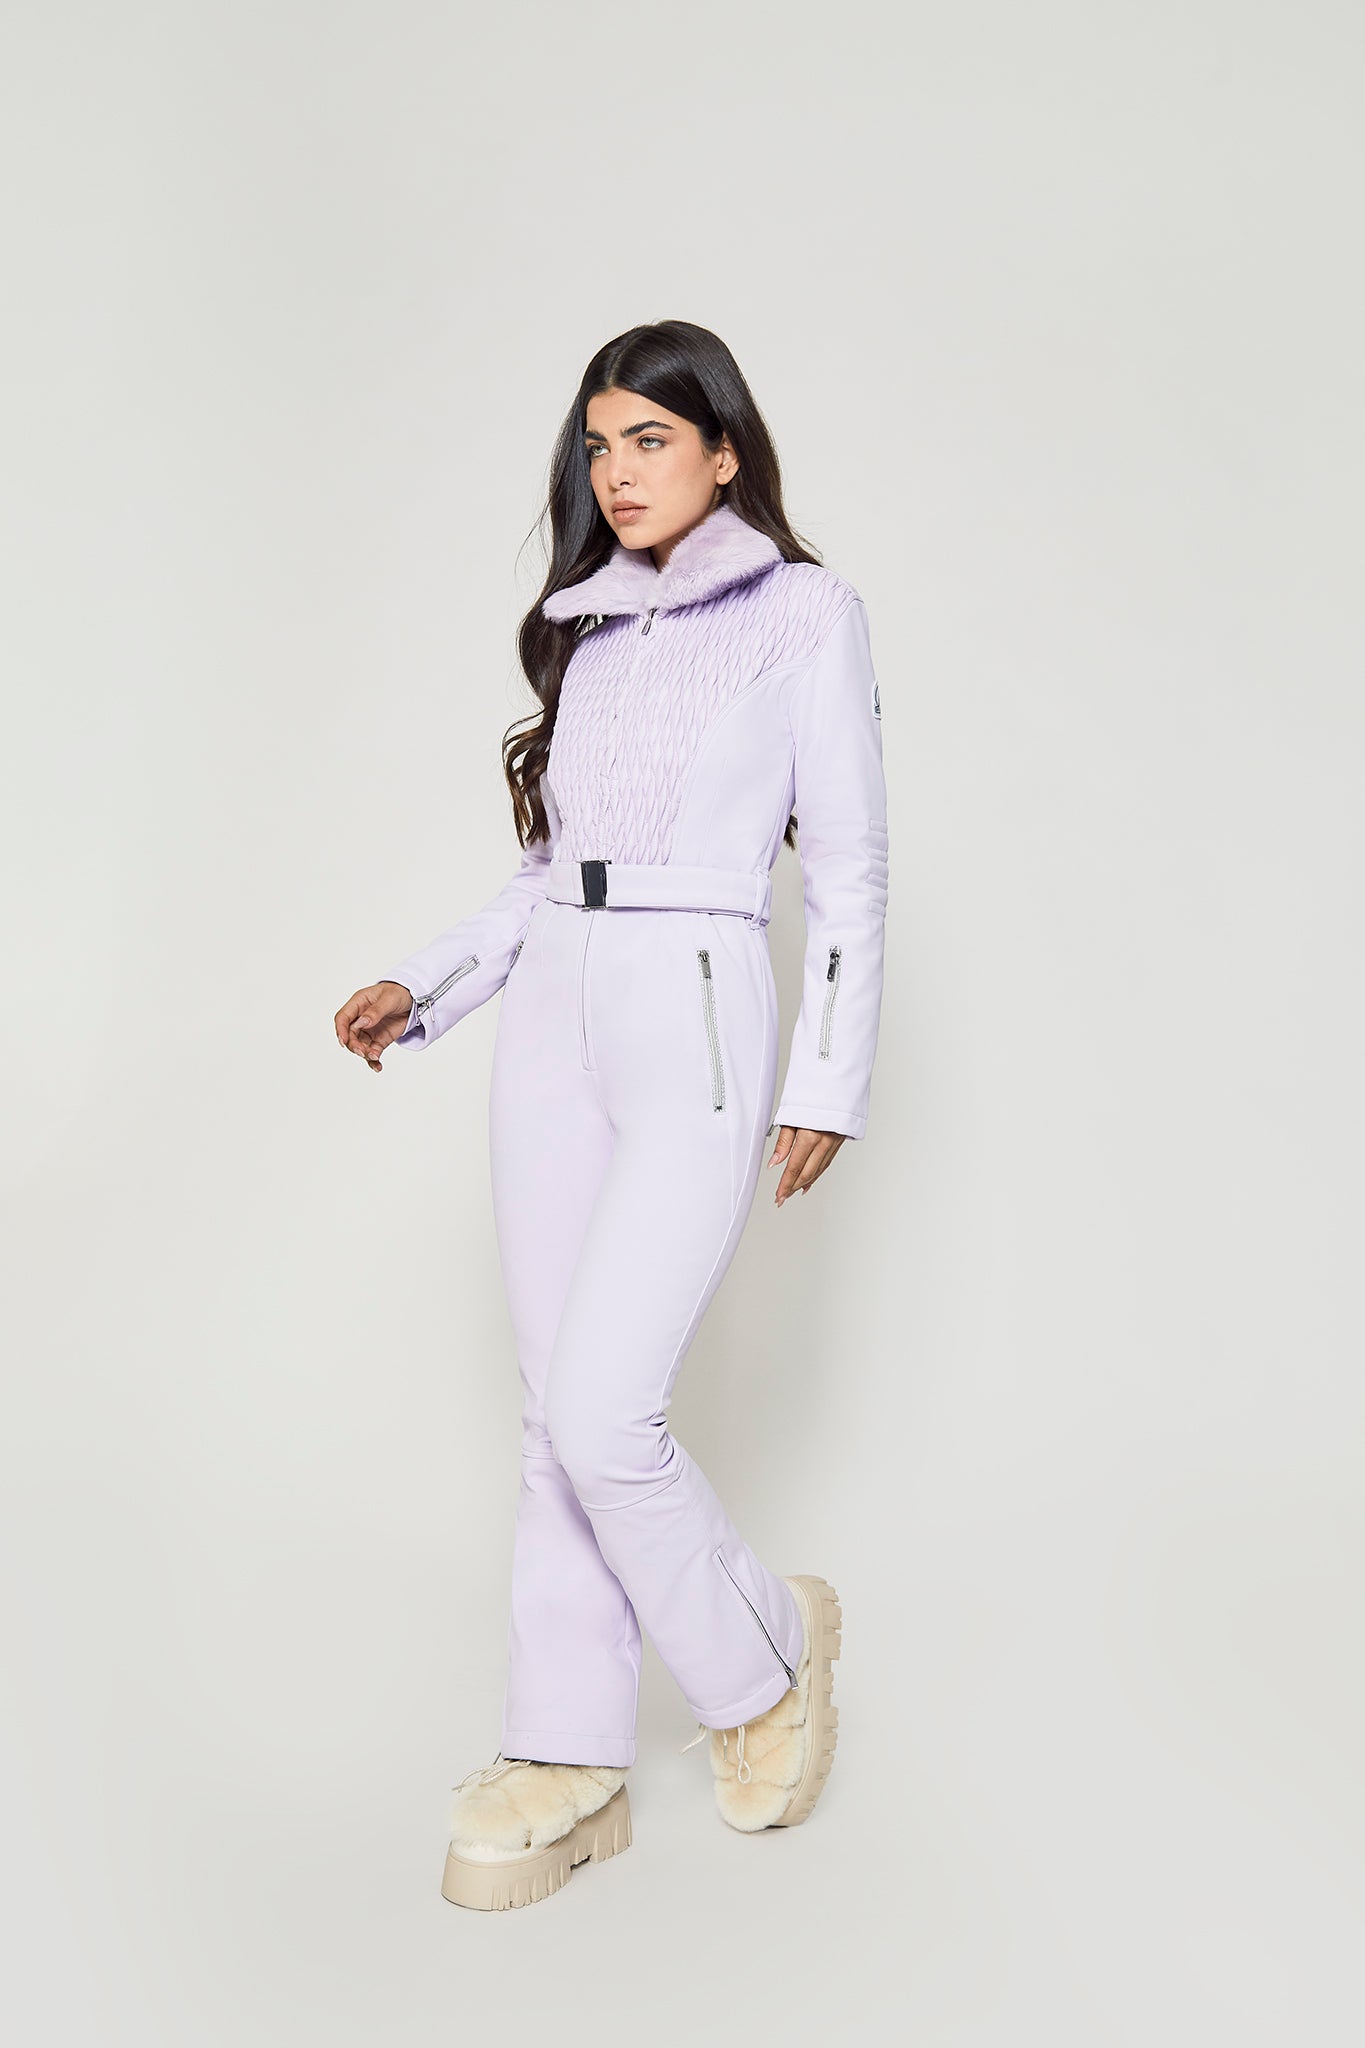 Luxe Vail Ski Suit